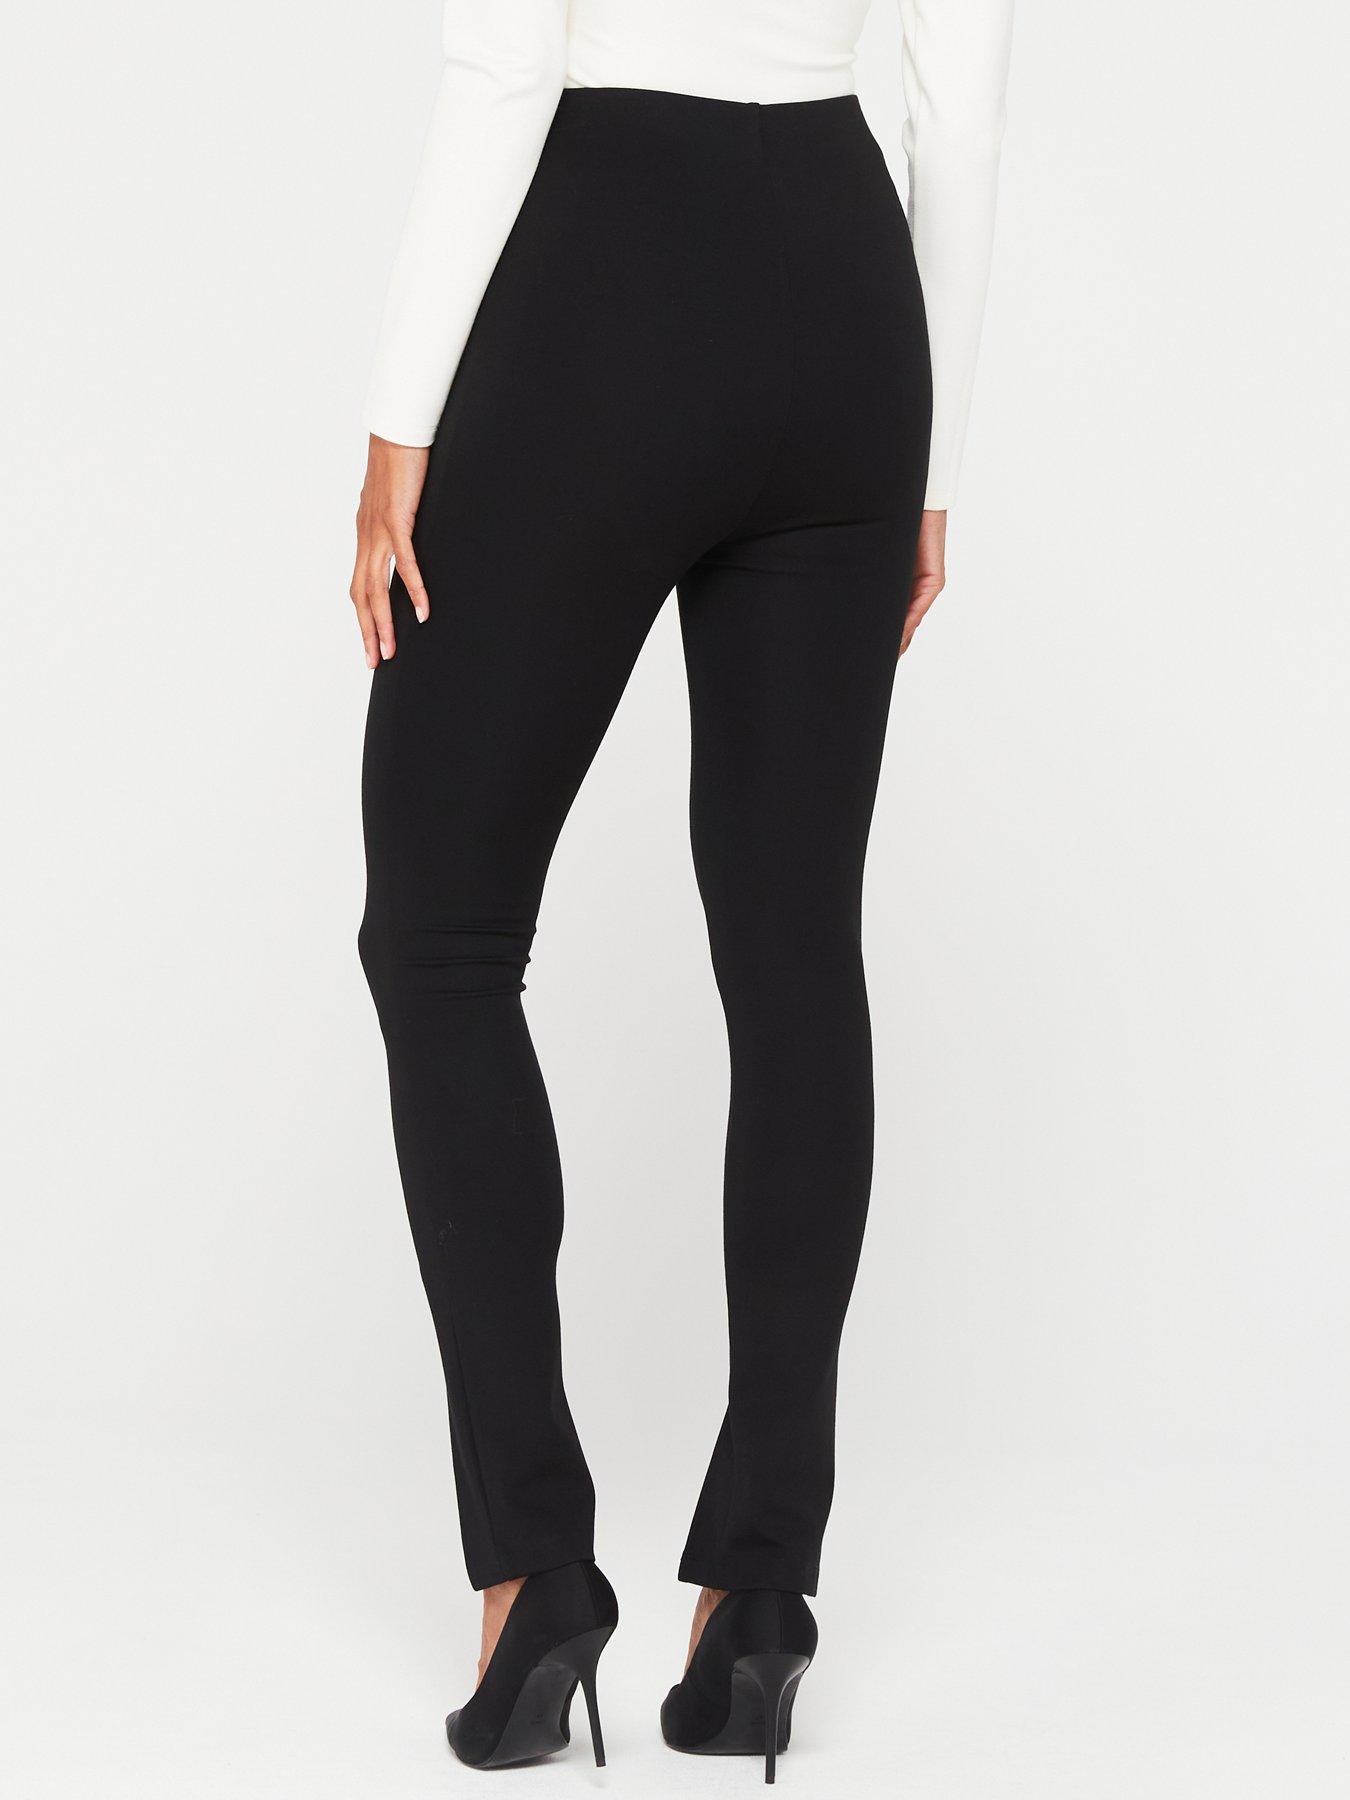 Curvy slit detail Leggings with 40% discount!